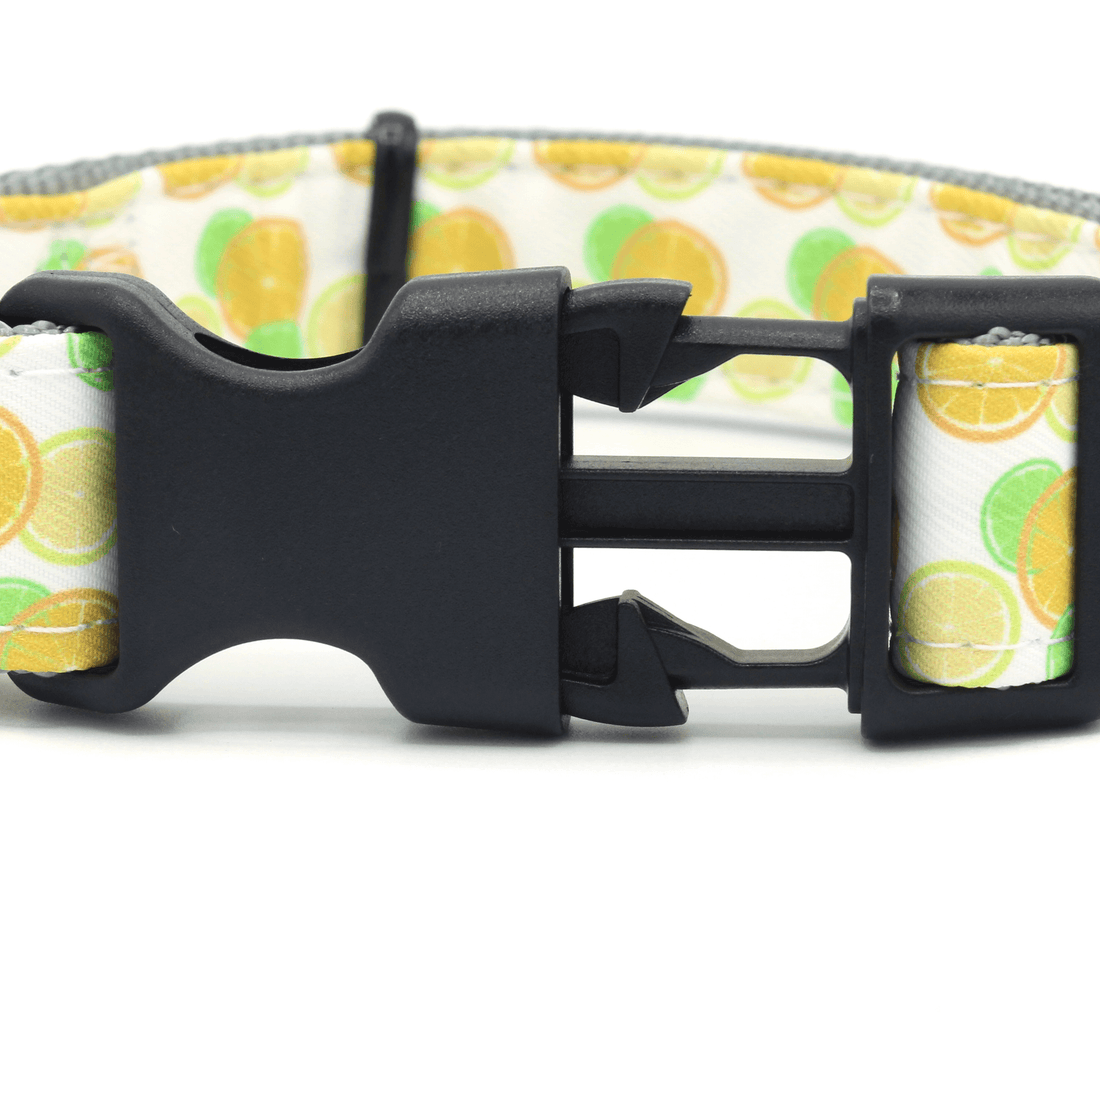 closeup of a black buckle on a fruit patterned leash